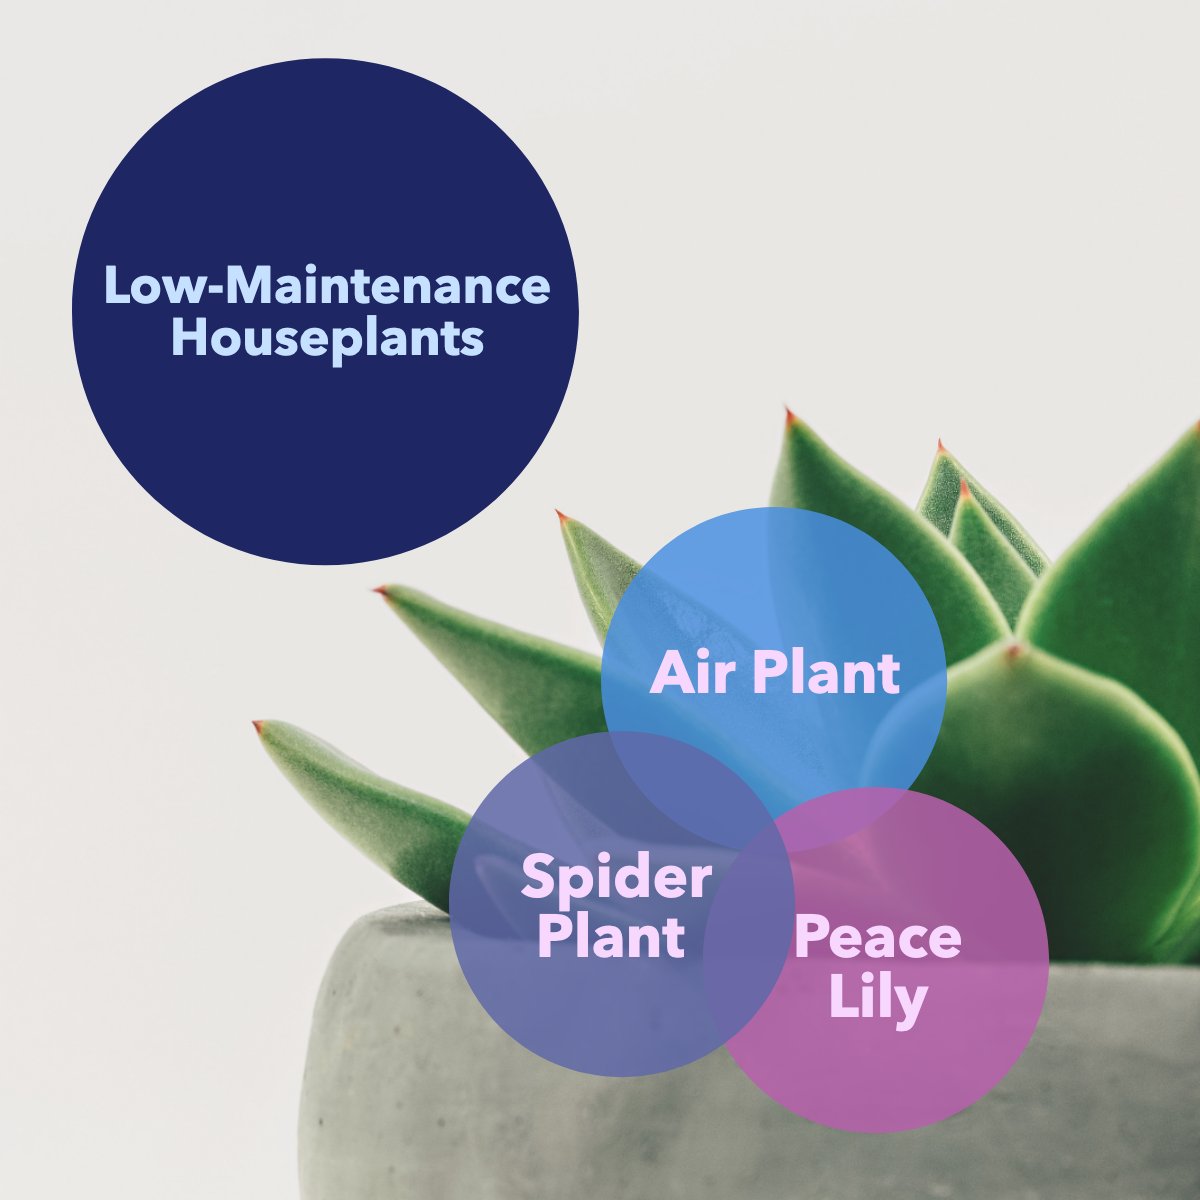 Adding plants to your space can help boost your mood 😀, but some require more TLC than others.

If you're living life on the go, we've got you covered. 😎

Check out these low-maintenance indoor plants:

Air Plant
Spider Plant
Peace Lily

#plants #plantcare